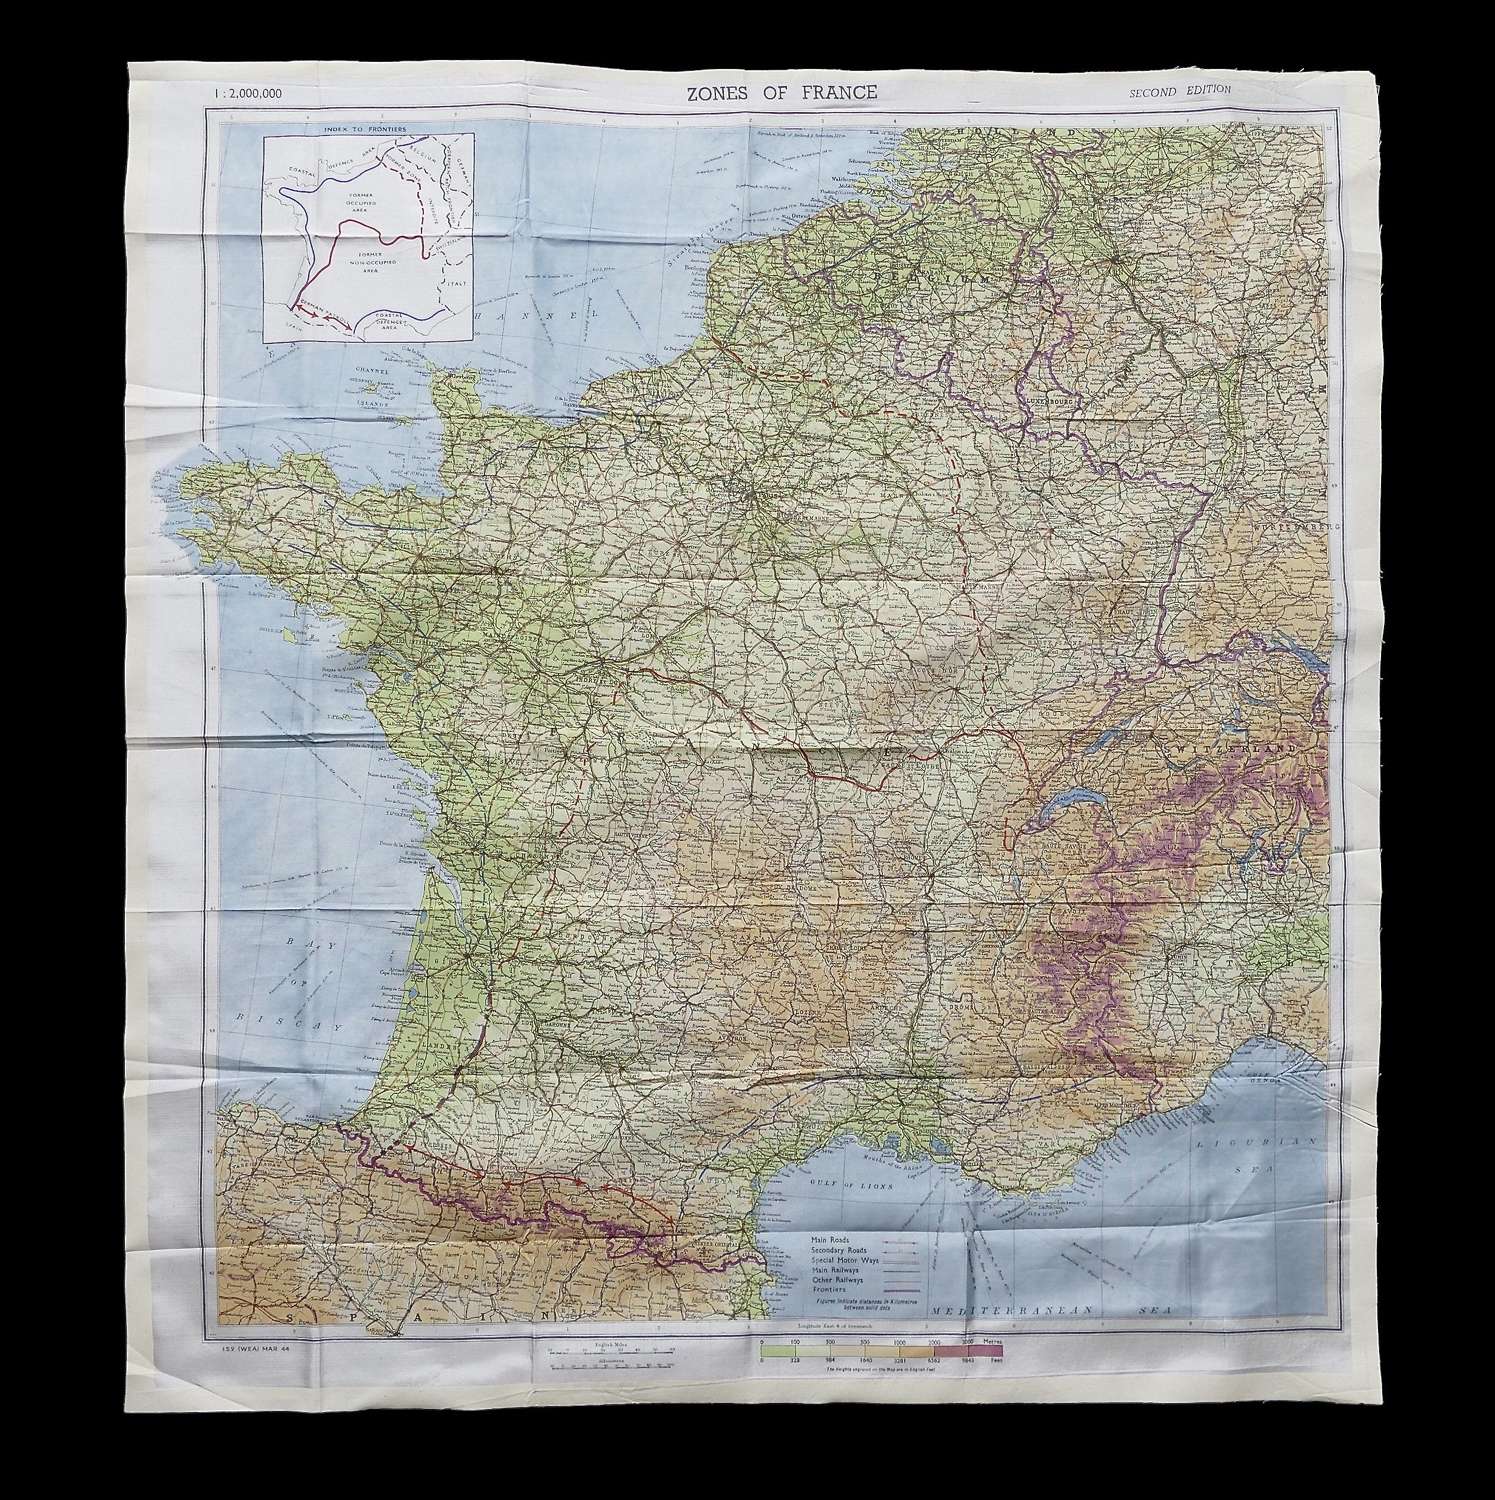 RAF / SOE escape and evasion map - Zones of France